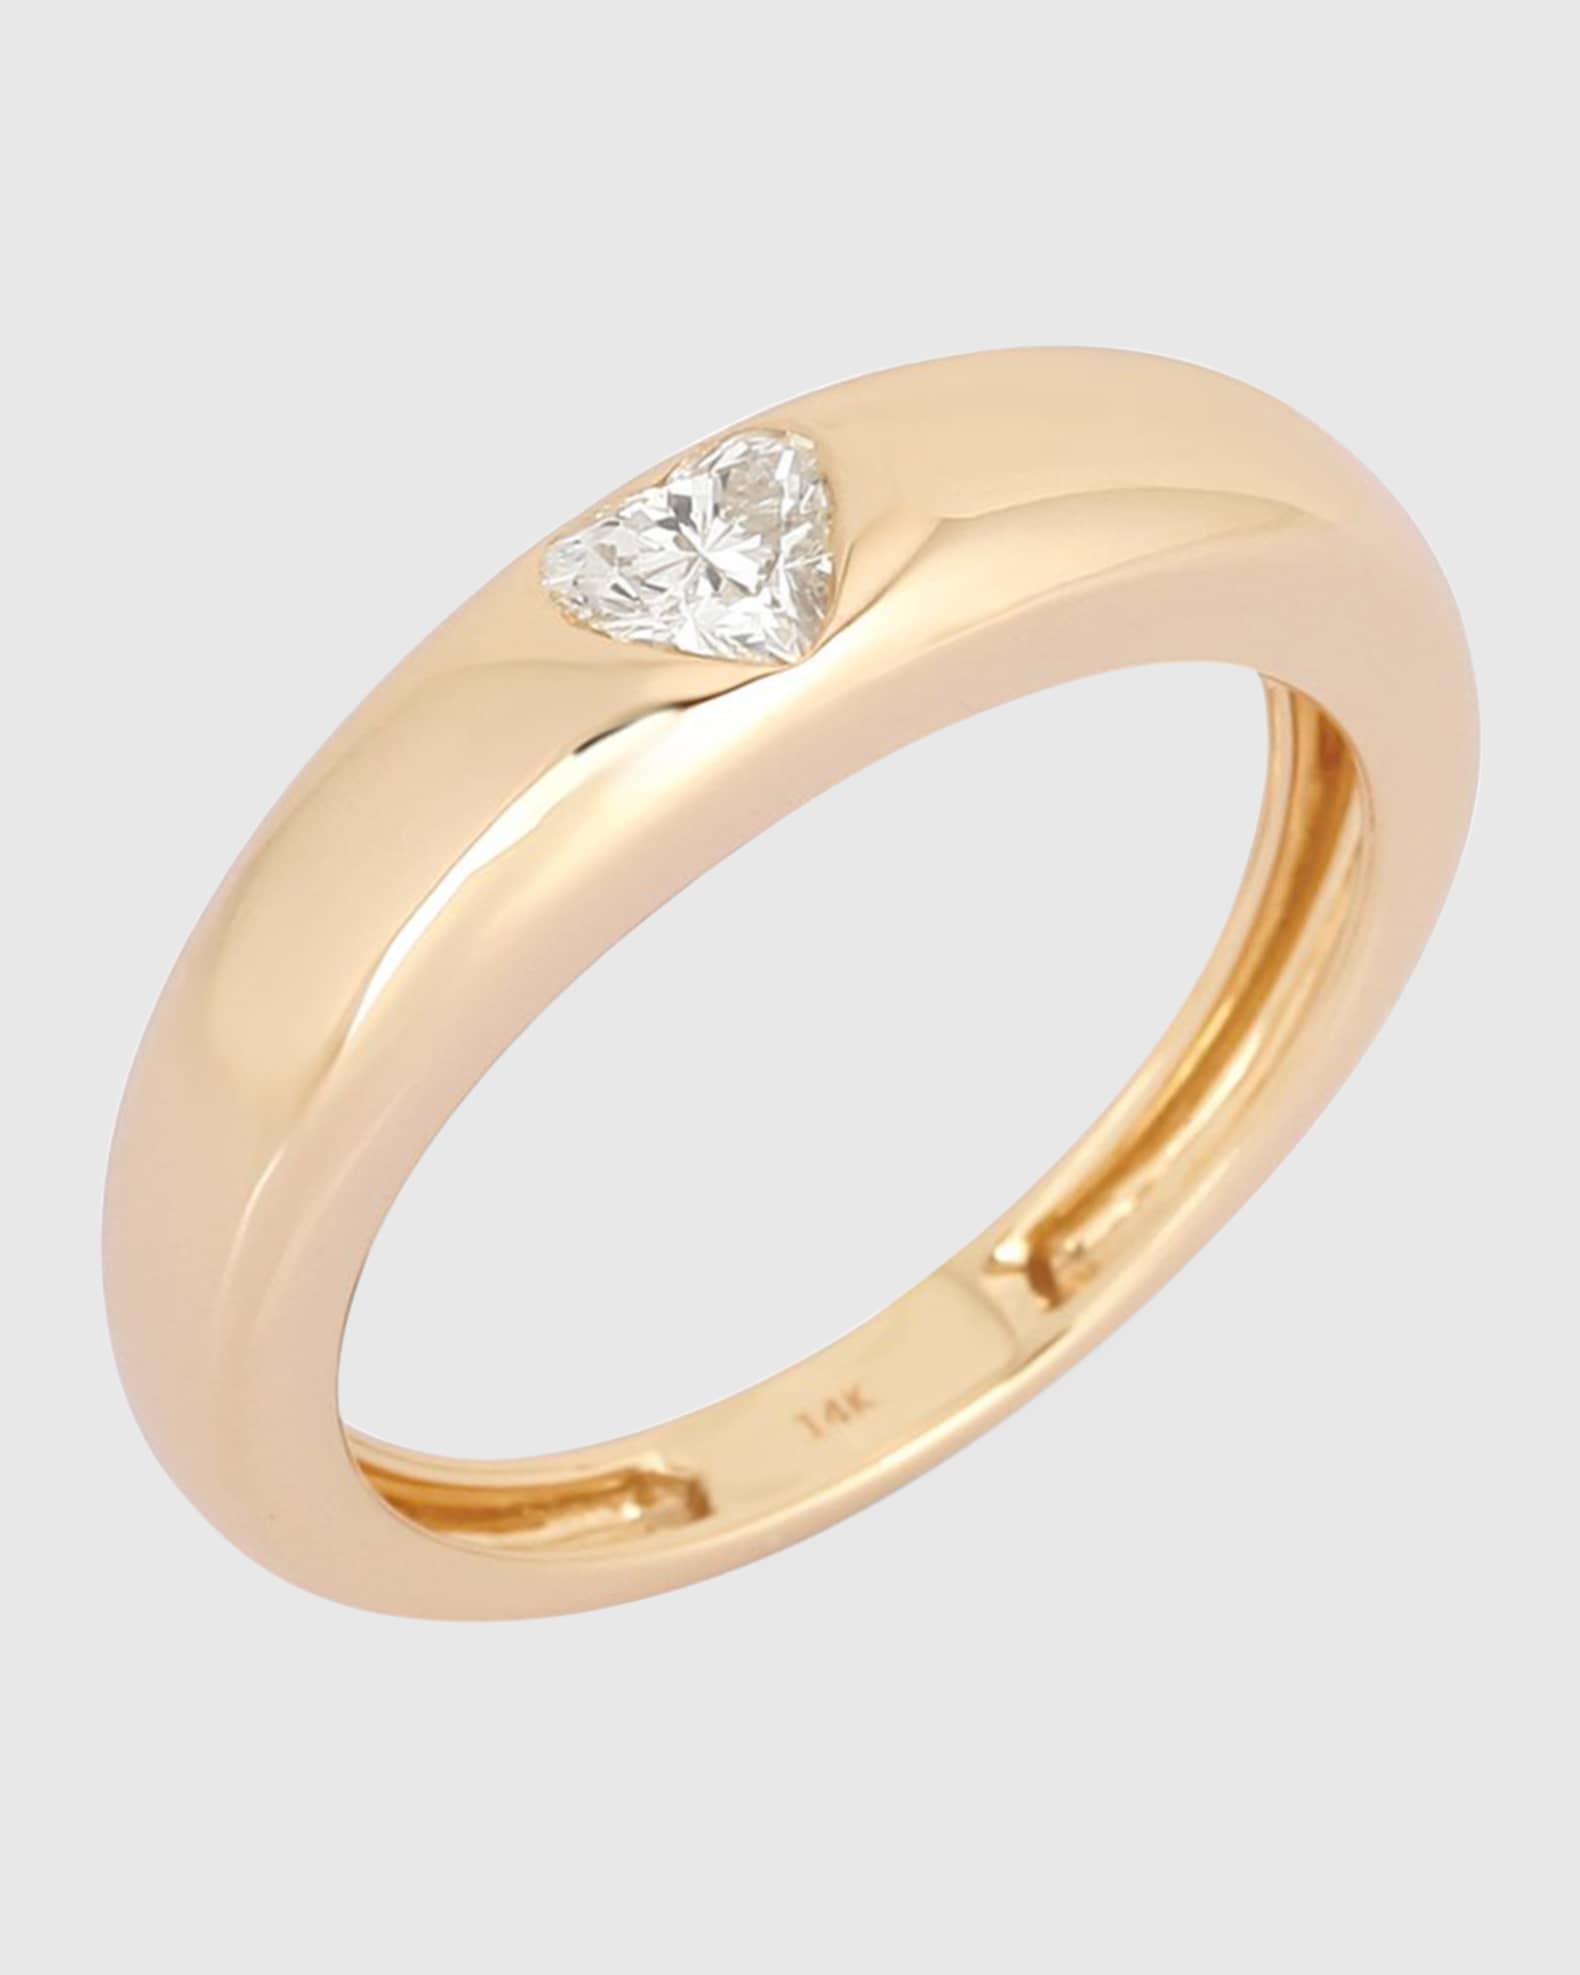 Louis Vuitton Heart Cocktail Ring - Gold-Plated Cocktail Ring